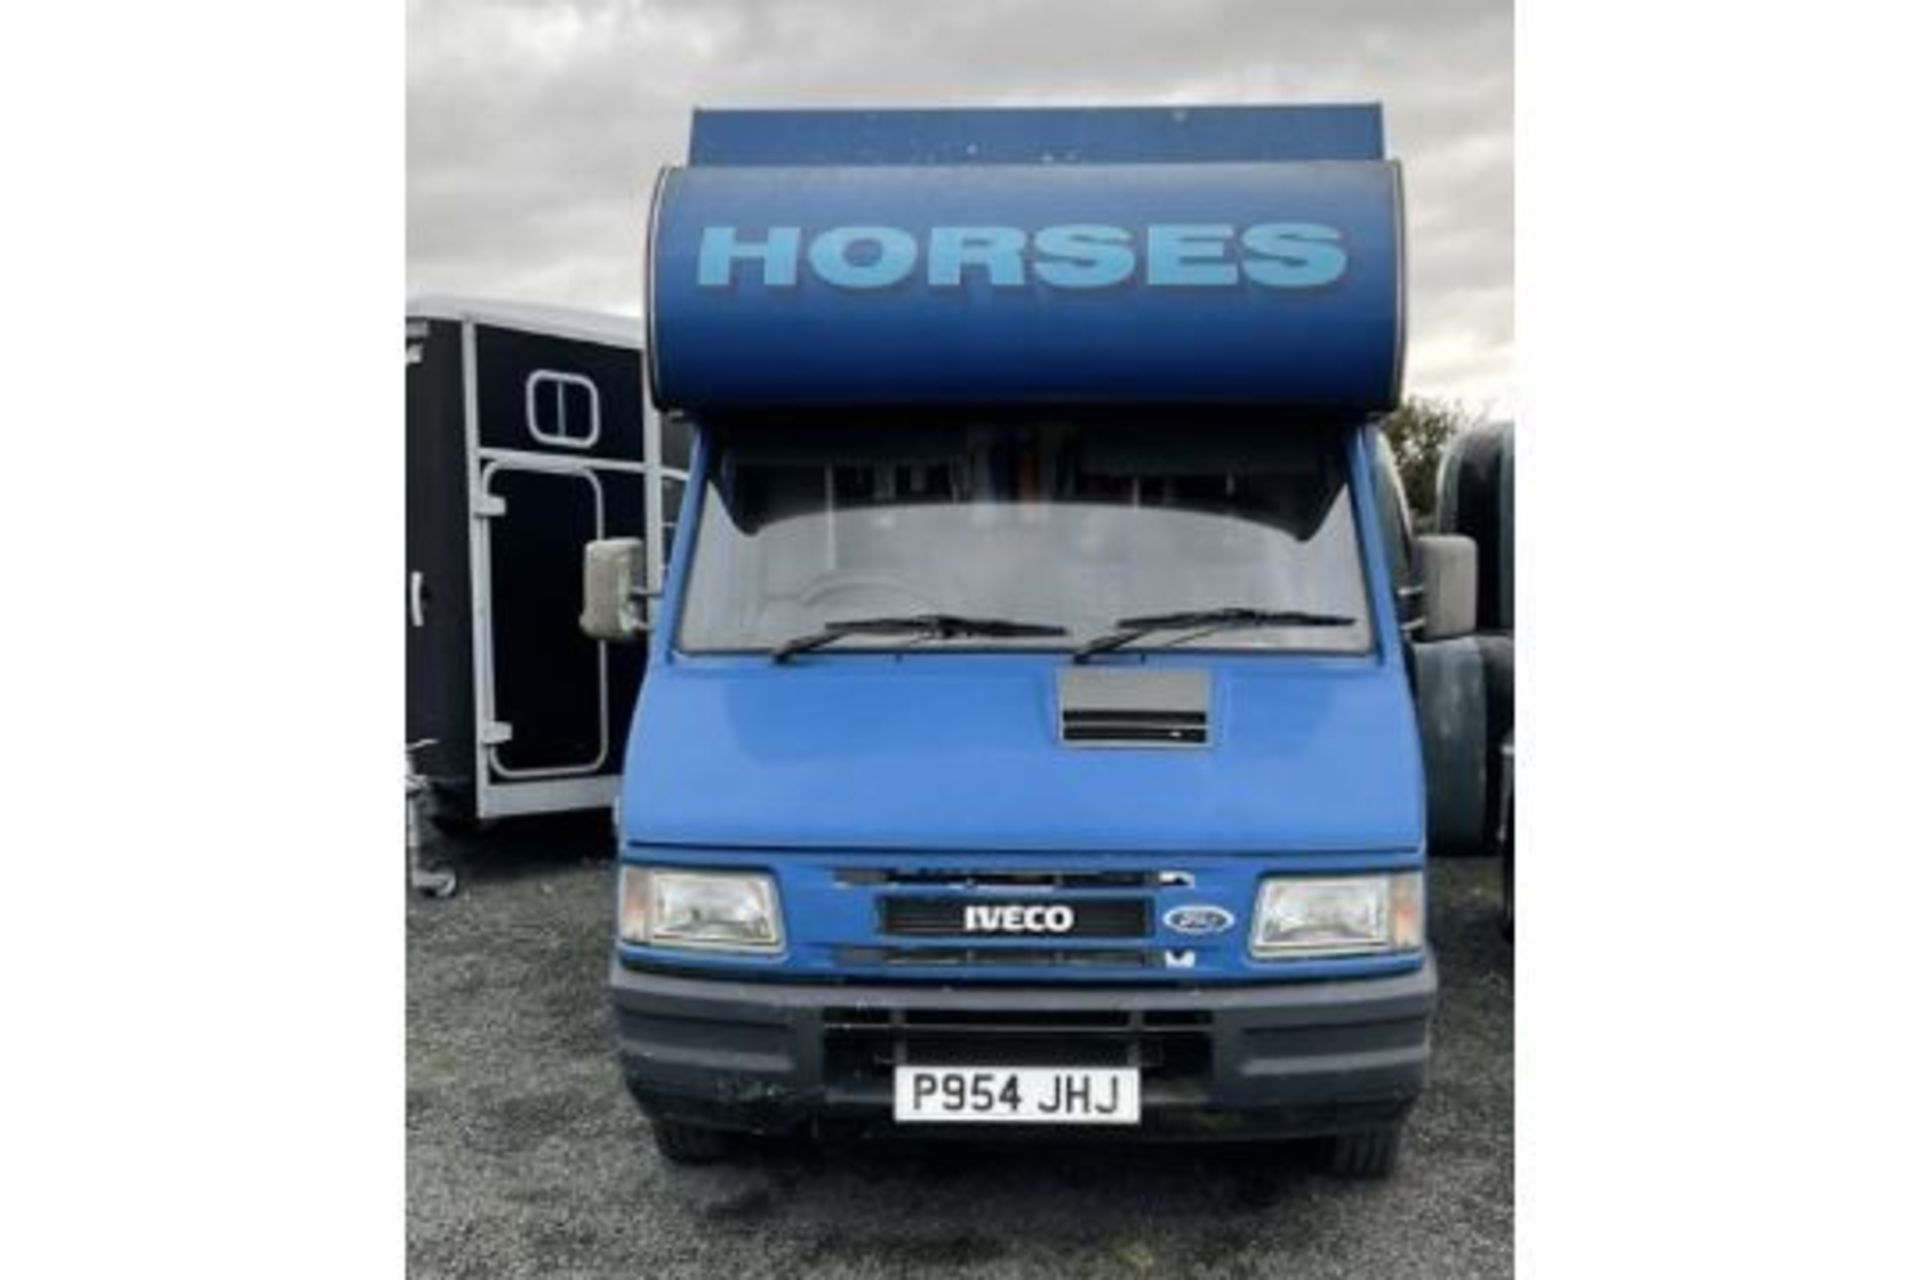 HORSEBOX TWO STALL IVECO .GROOMS AREA AND SIDE RAMP.STARTS RUNS AND DRIVES .LOCATED IN NORTHERN - Image 5 of 7